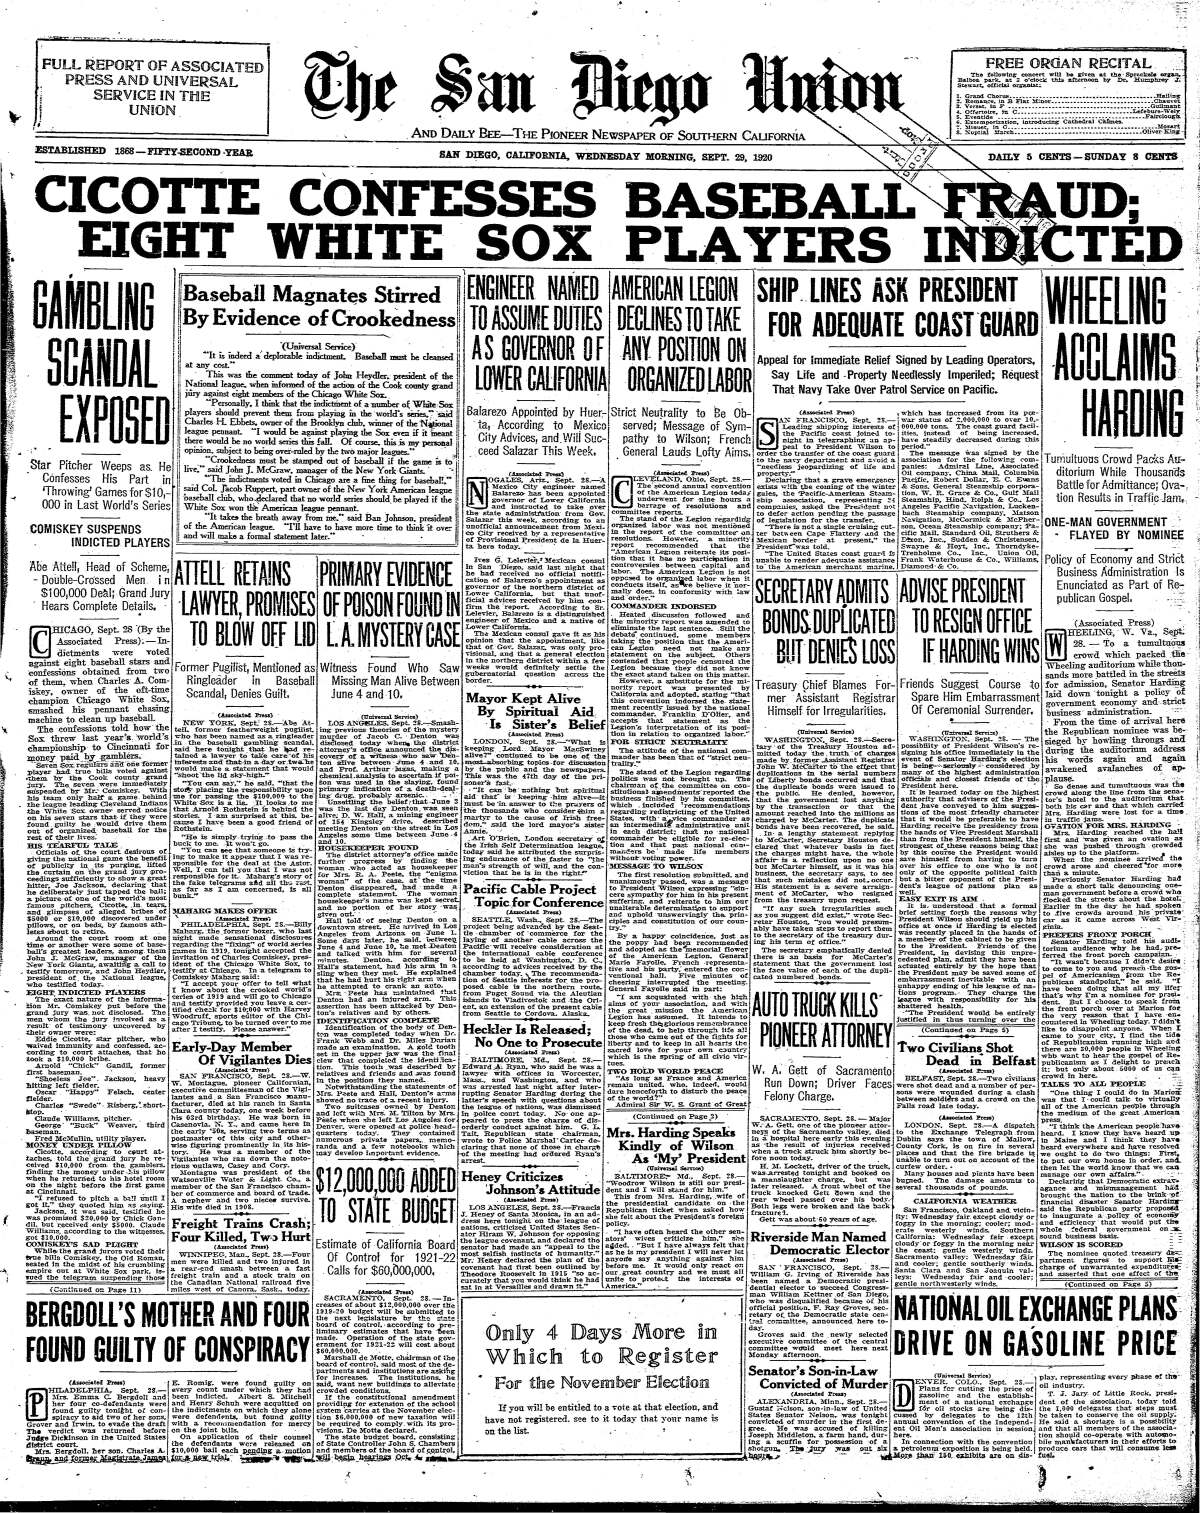 An Account of the 1919 Chicago Black Sox Scandal and 1921 Trial